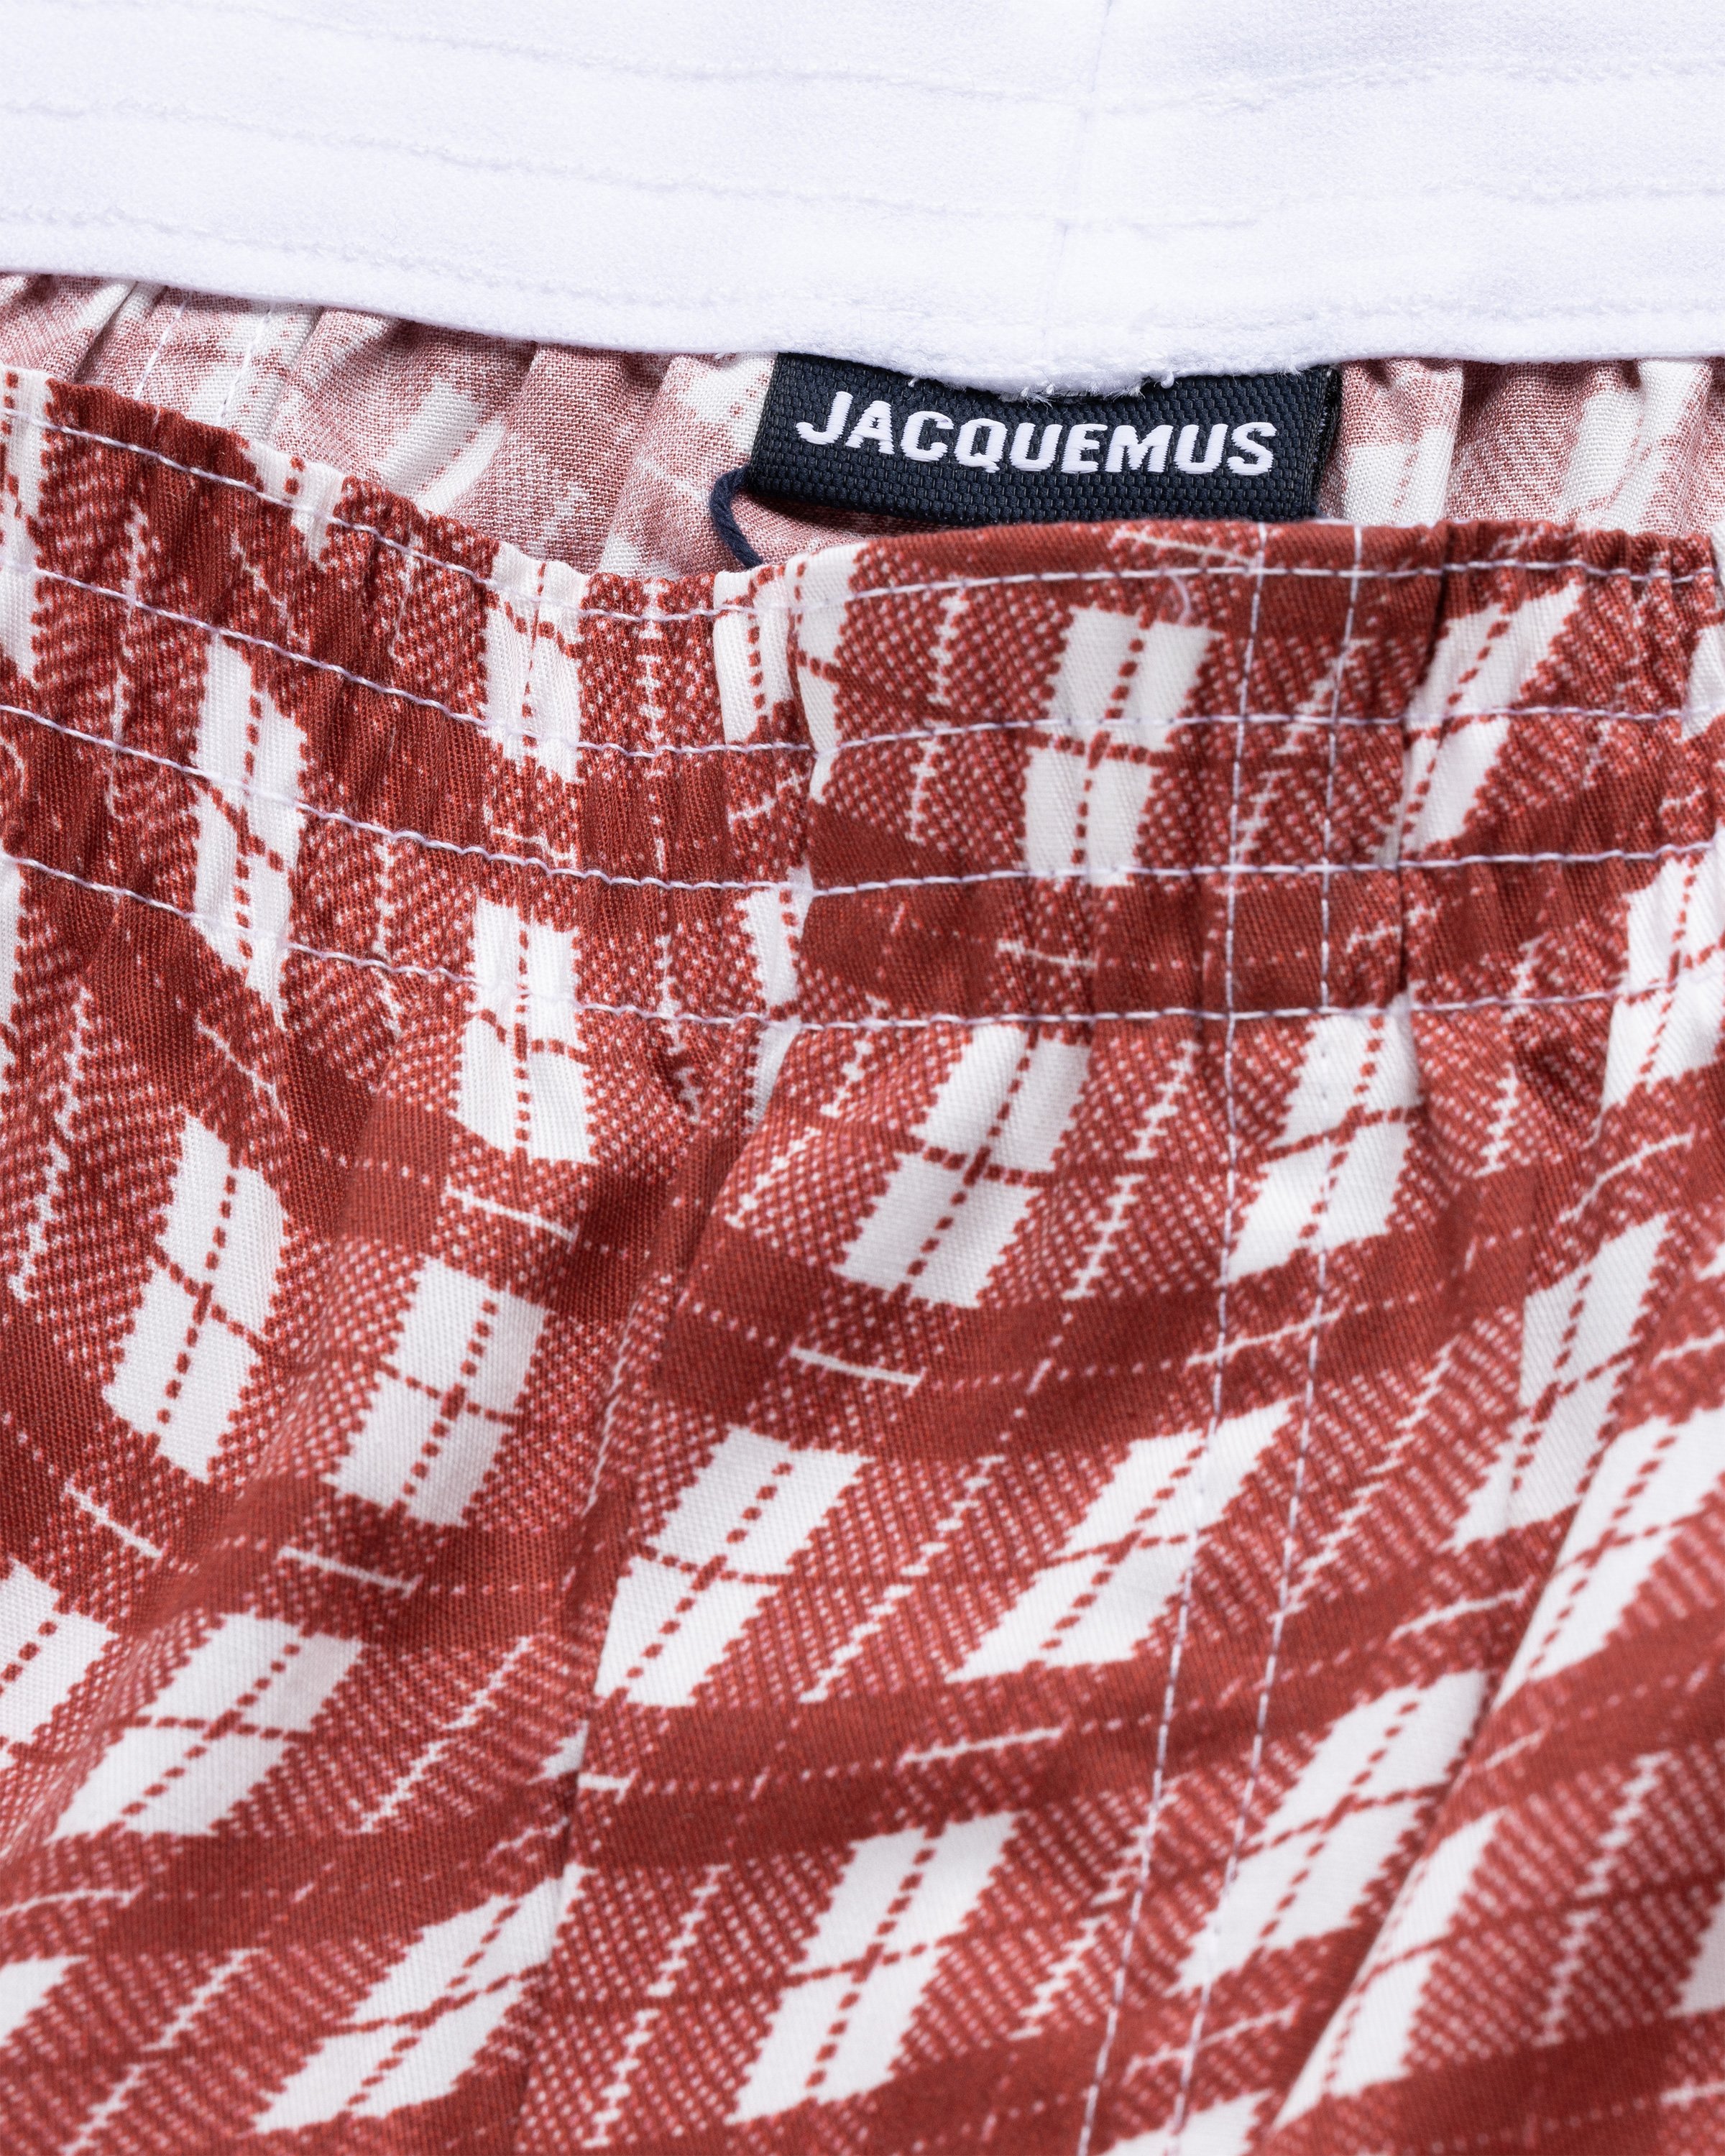 JACQUEMUS - Le Caleçon Print Dark Red Deformed Check - Clothing - Red - Image 5